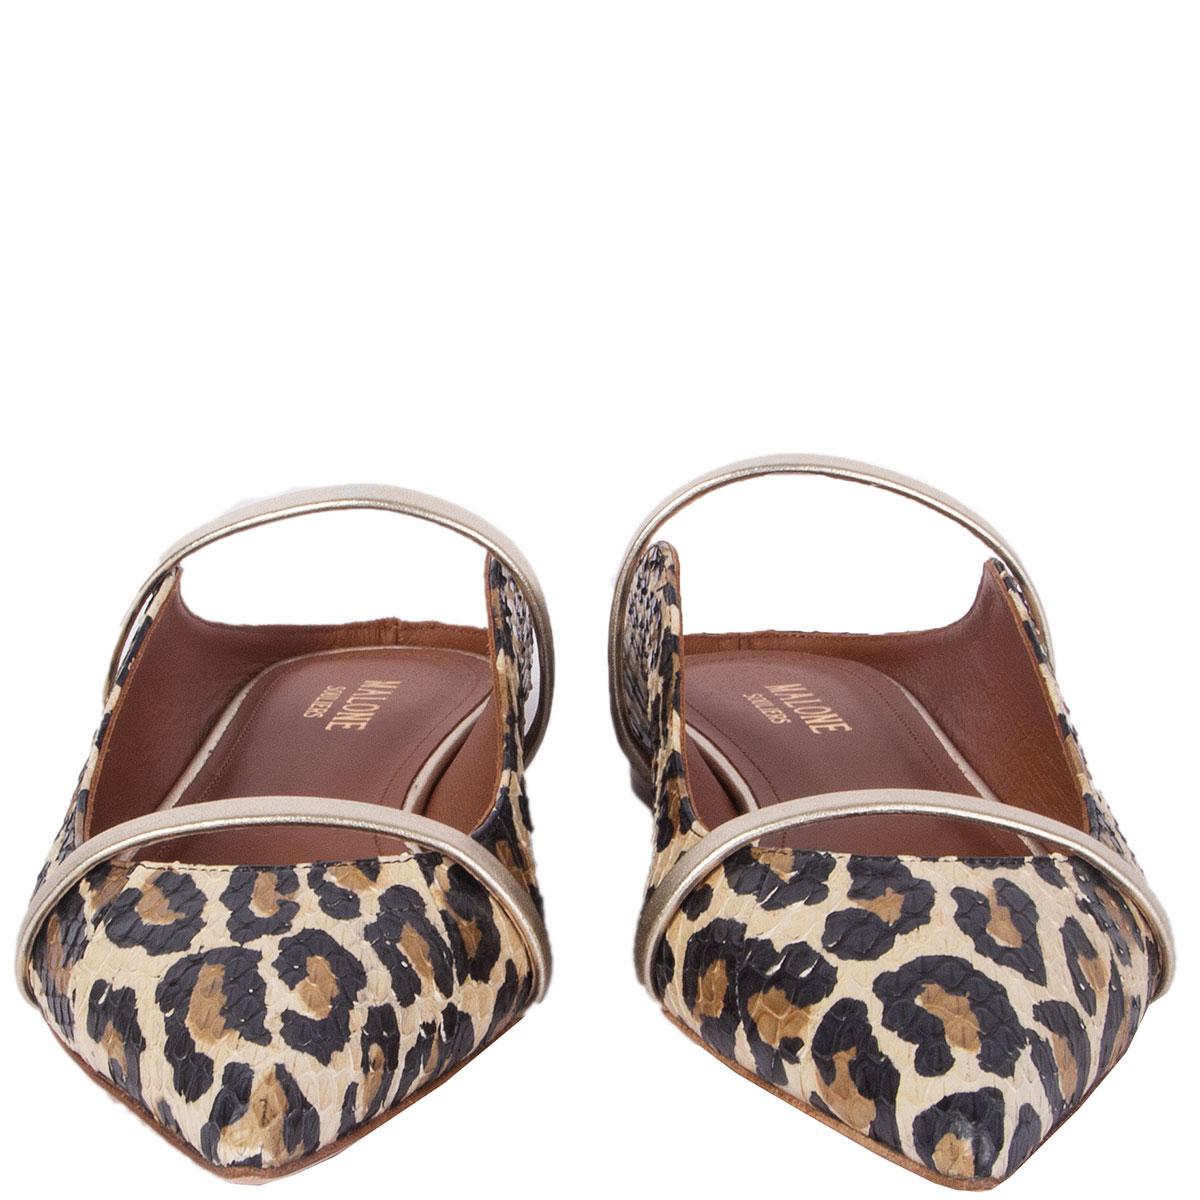 100% authentic Malone Souliers 'Maureen' mules in ivory, black and beige leopard print snakeskin featuring light gold-tone elastic leather straps. Brand new. Come with dust bag. 

Measurements
Imprinted Size	38
Shoe Size	37.5
Inside Sole	24.5cm